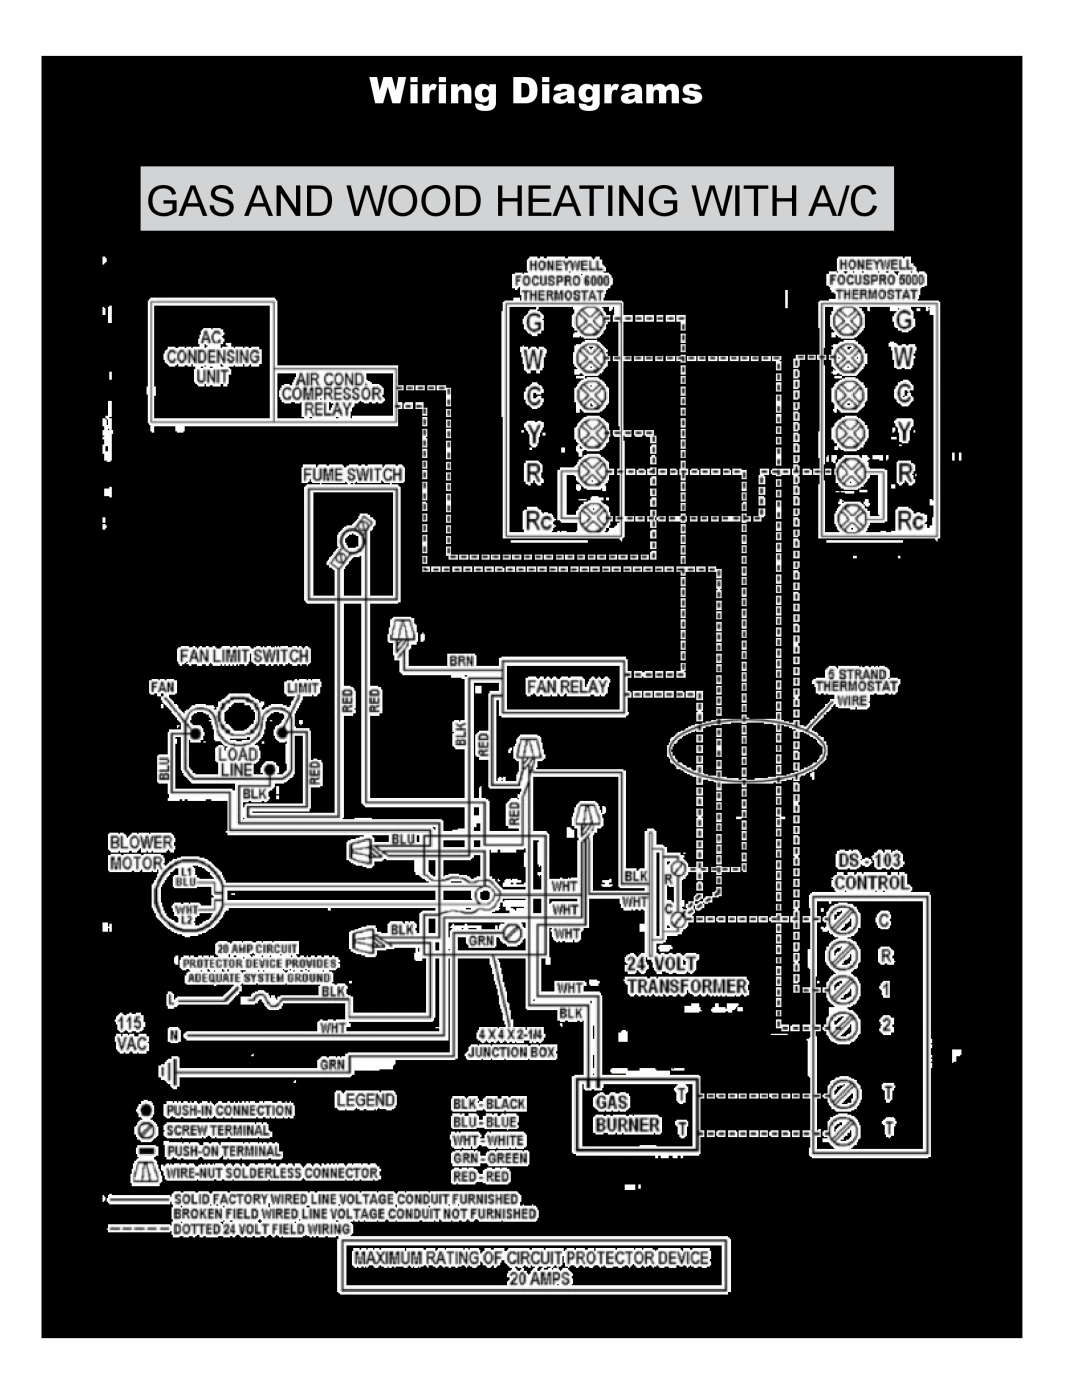 Yukon Advanced Optics Oil Furnace owner manual Gas And Wood Heating With A/C, Wiring Diagrams 